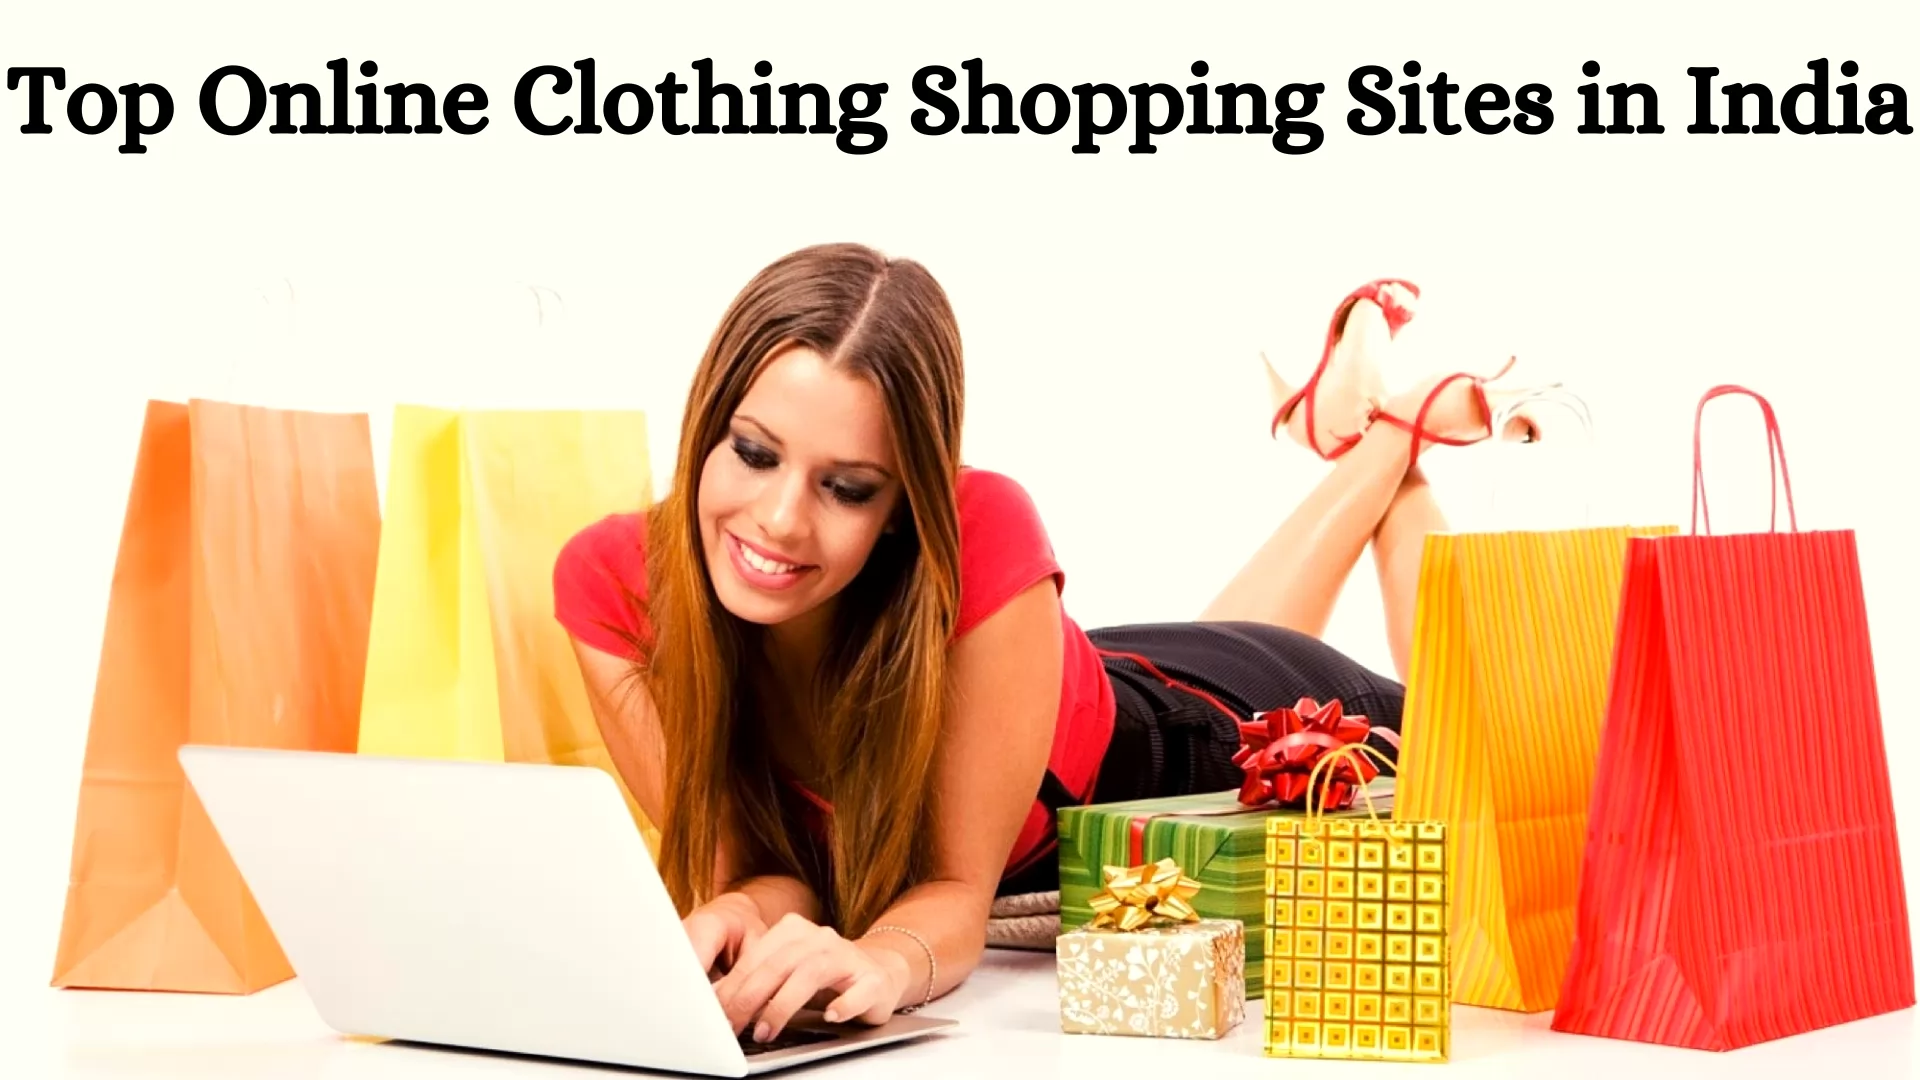 Top 21 Online Clothing Shopping Sites in India